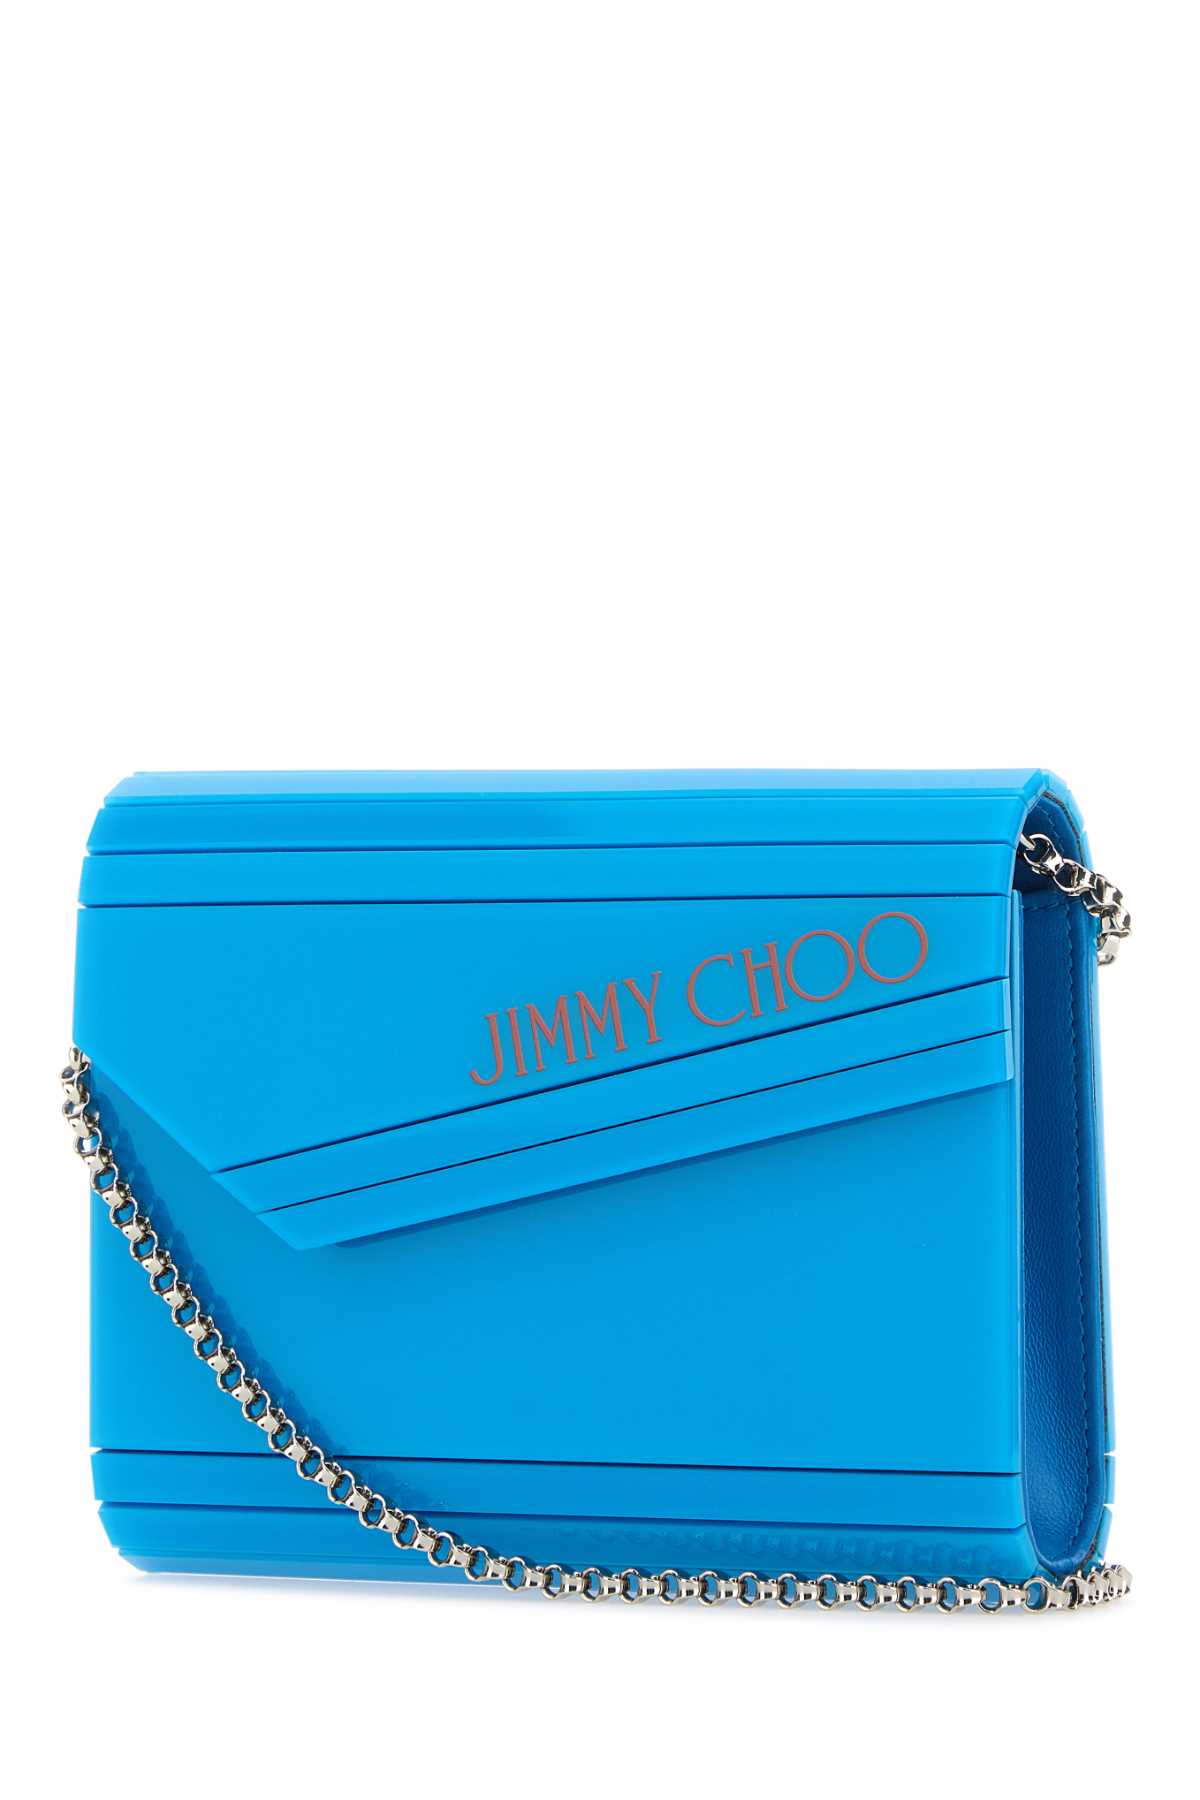 Jimmy Choo Woman Turquoise Acrylic Candy Clutch In Skypaprika